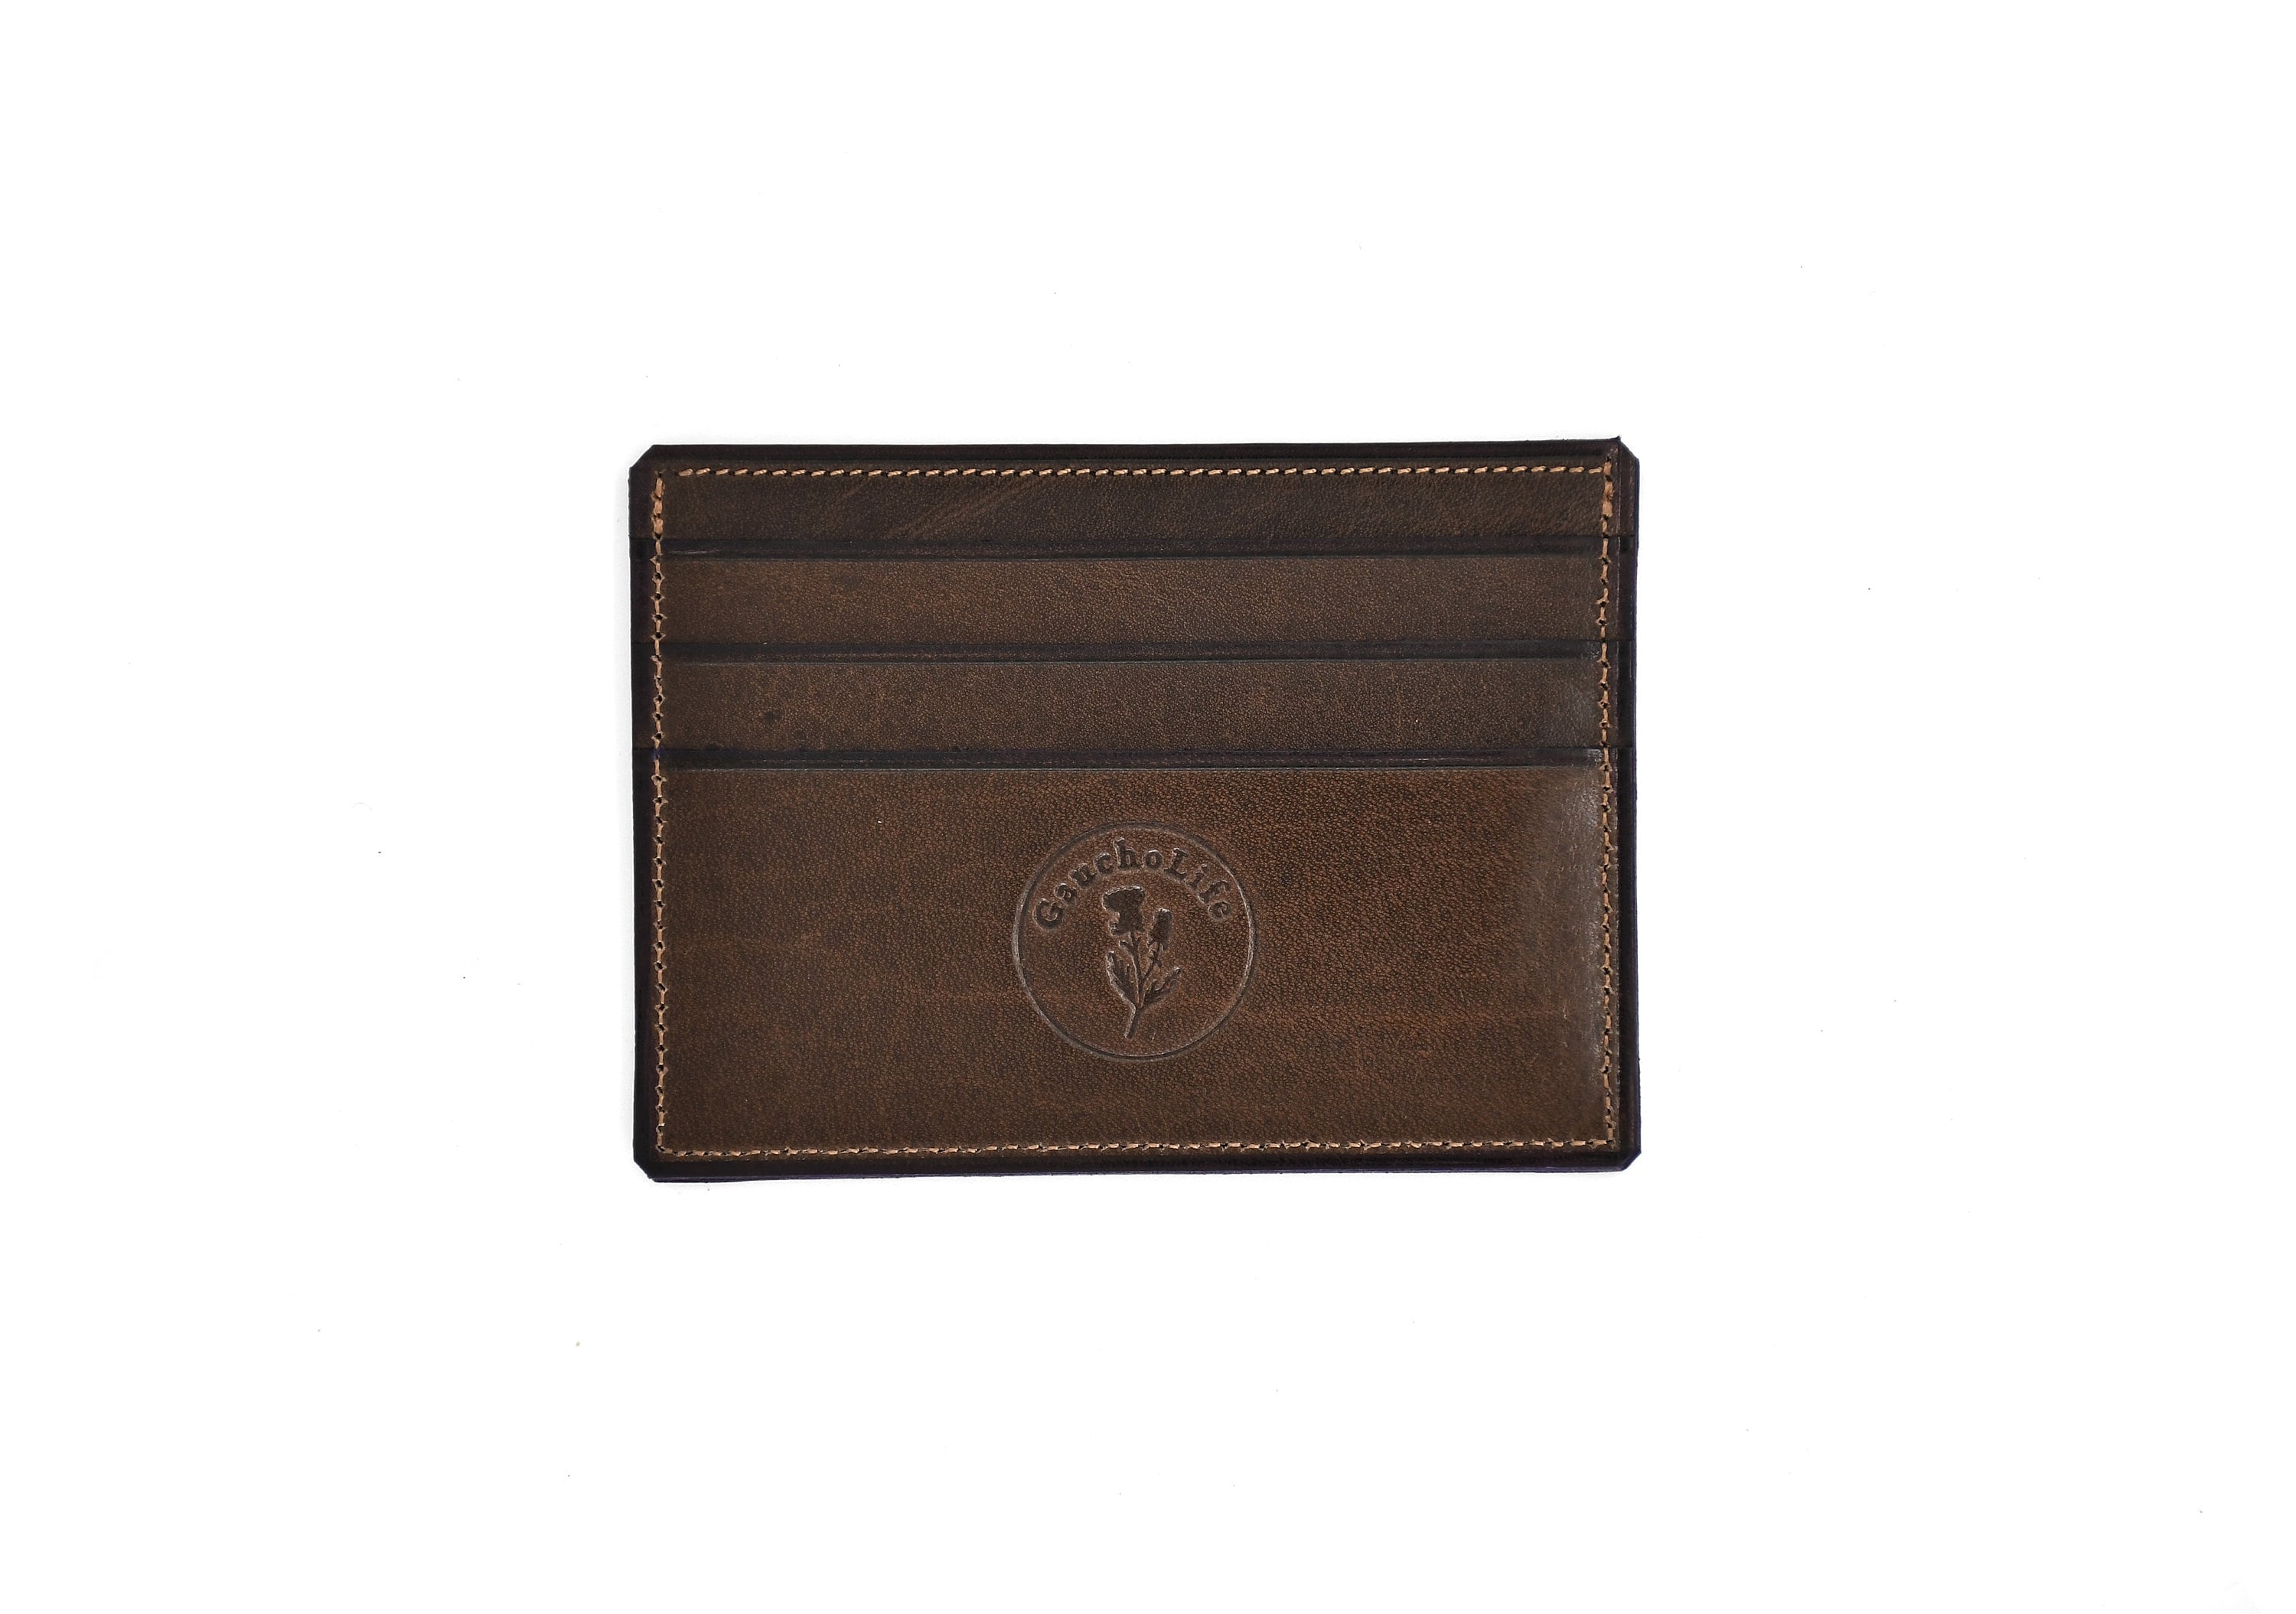 Gaucholife Wallet Thin Woven Leather Card Holder (Cross)